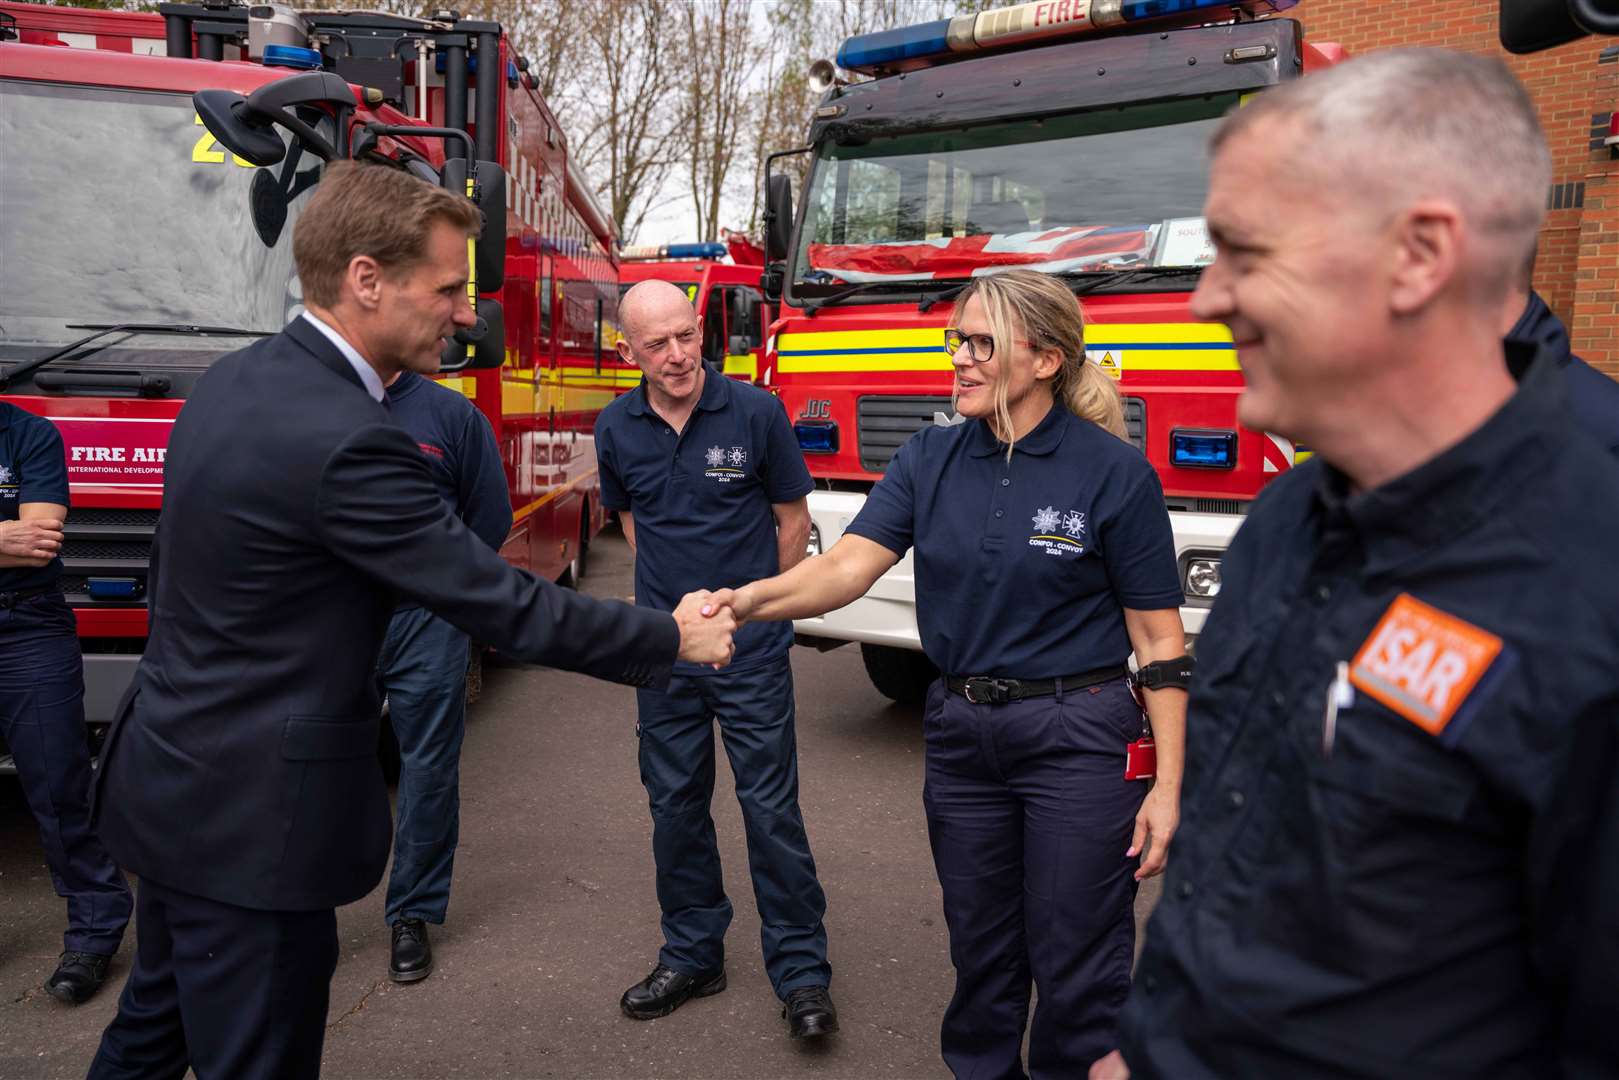 Home Office minister Chris Philp met some of the convoy’s volunteers (Edward Matthews/PA)